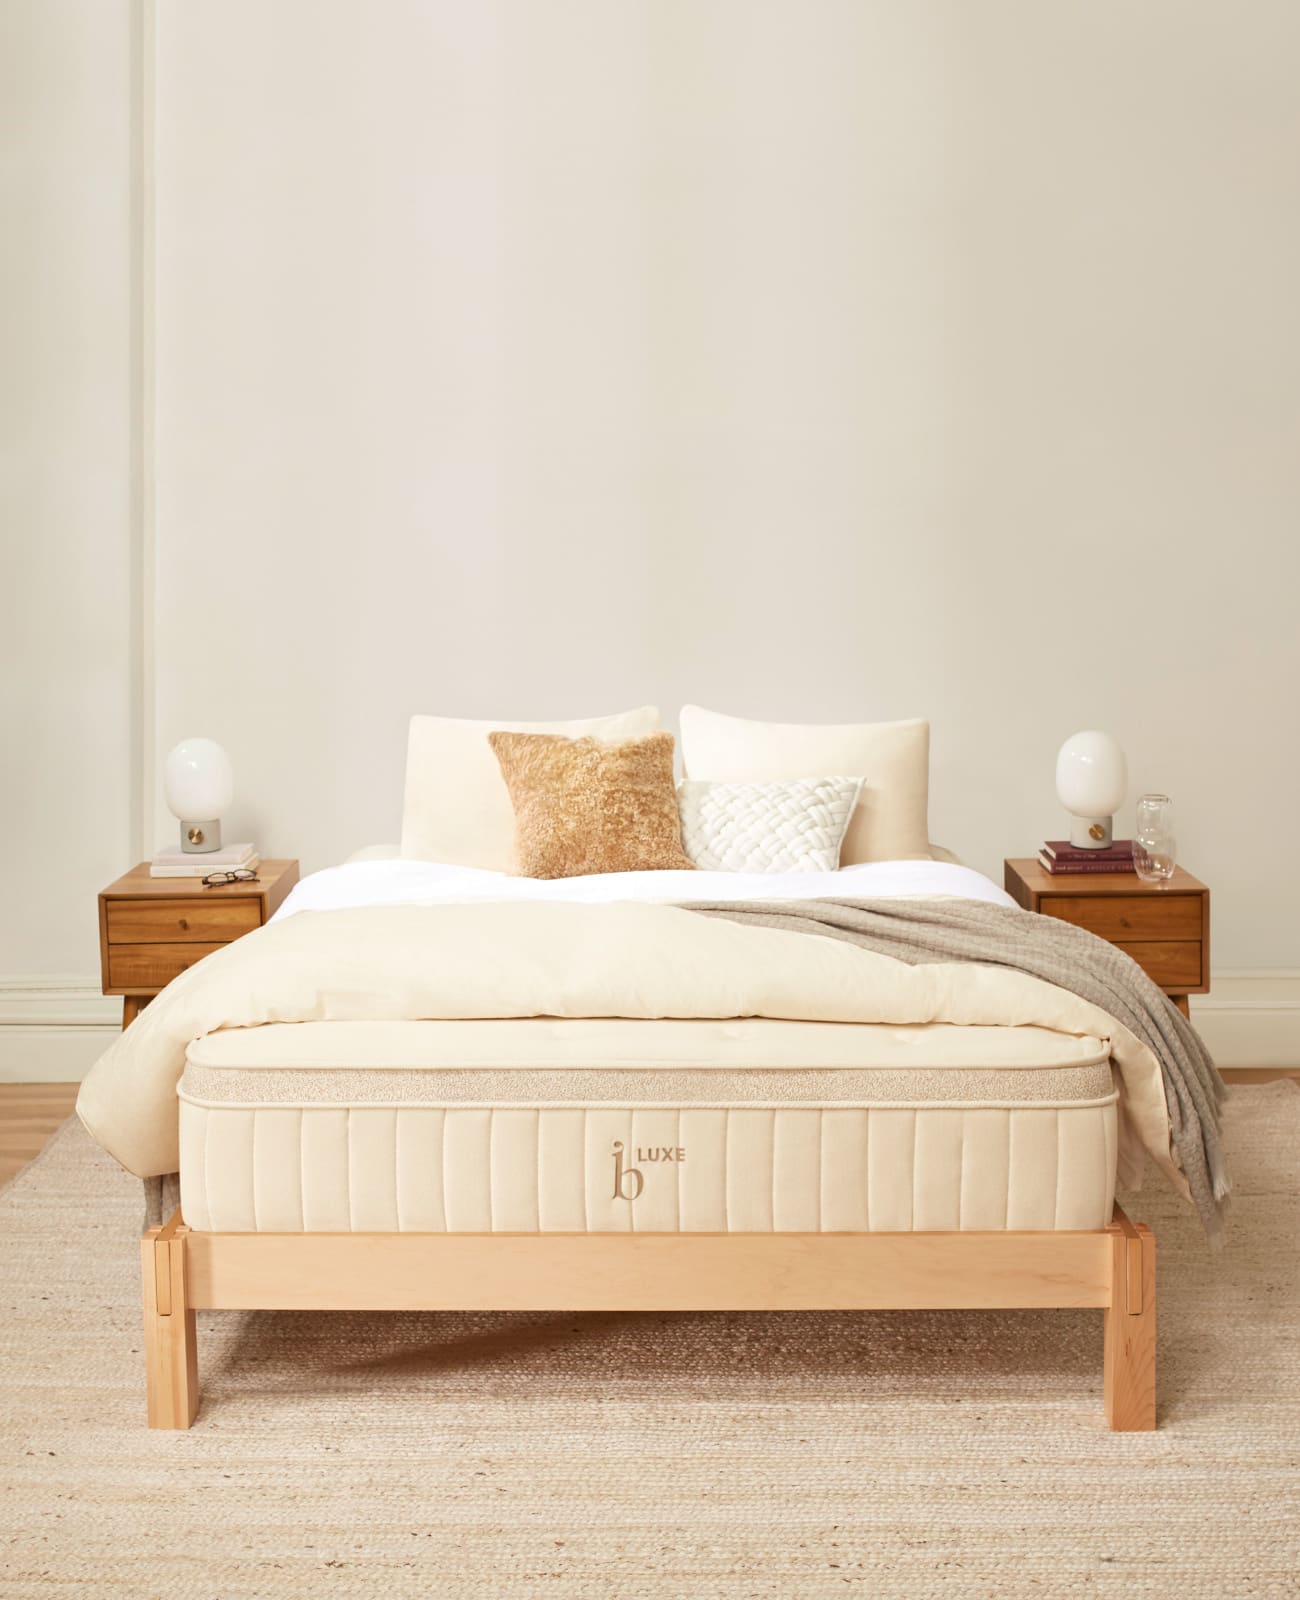 Birch Luxe Natural Mattress with bedding on top